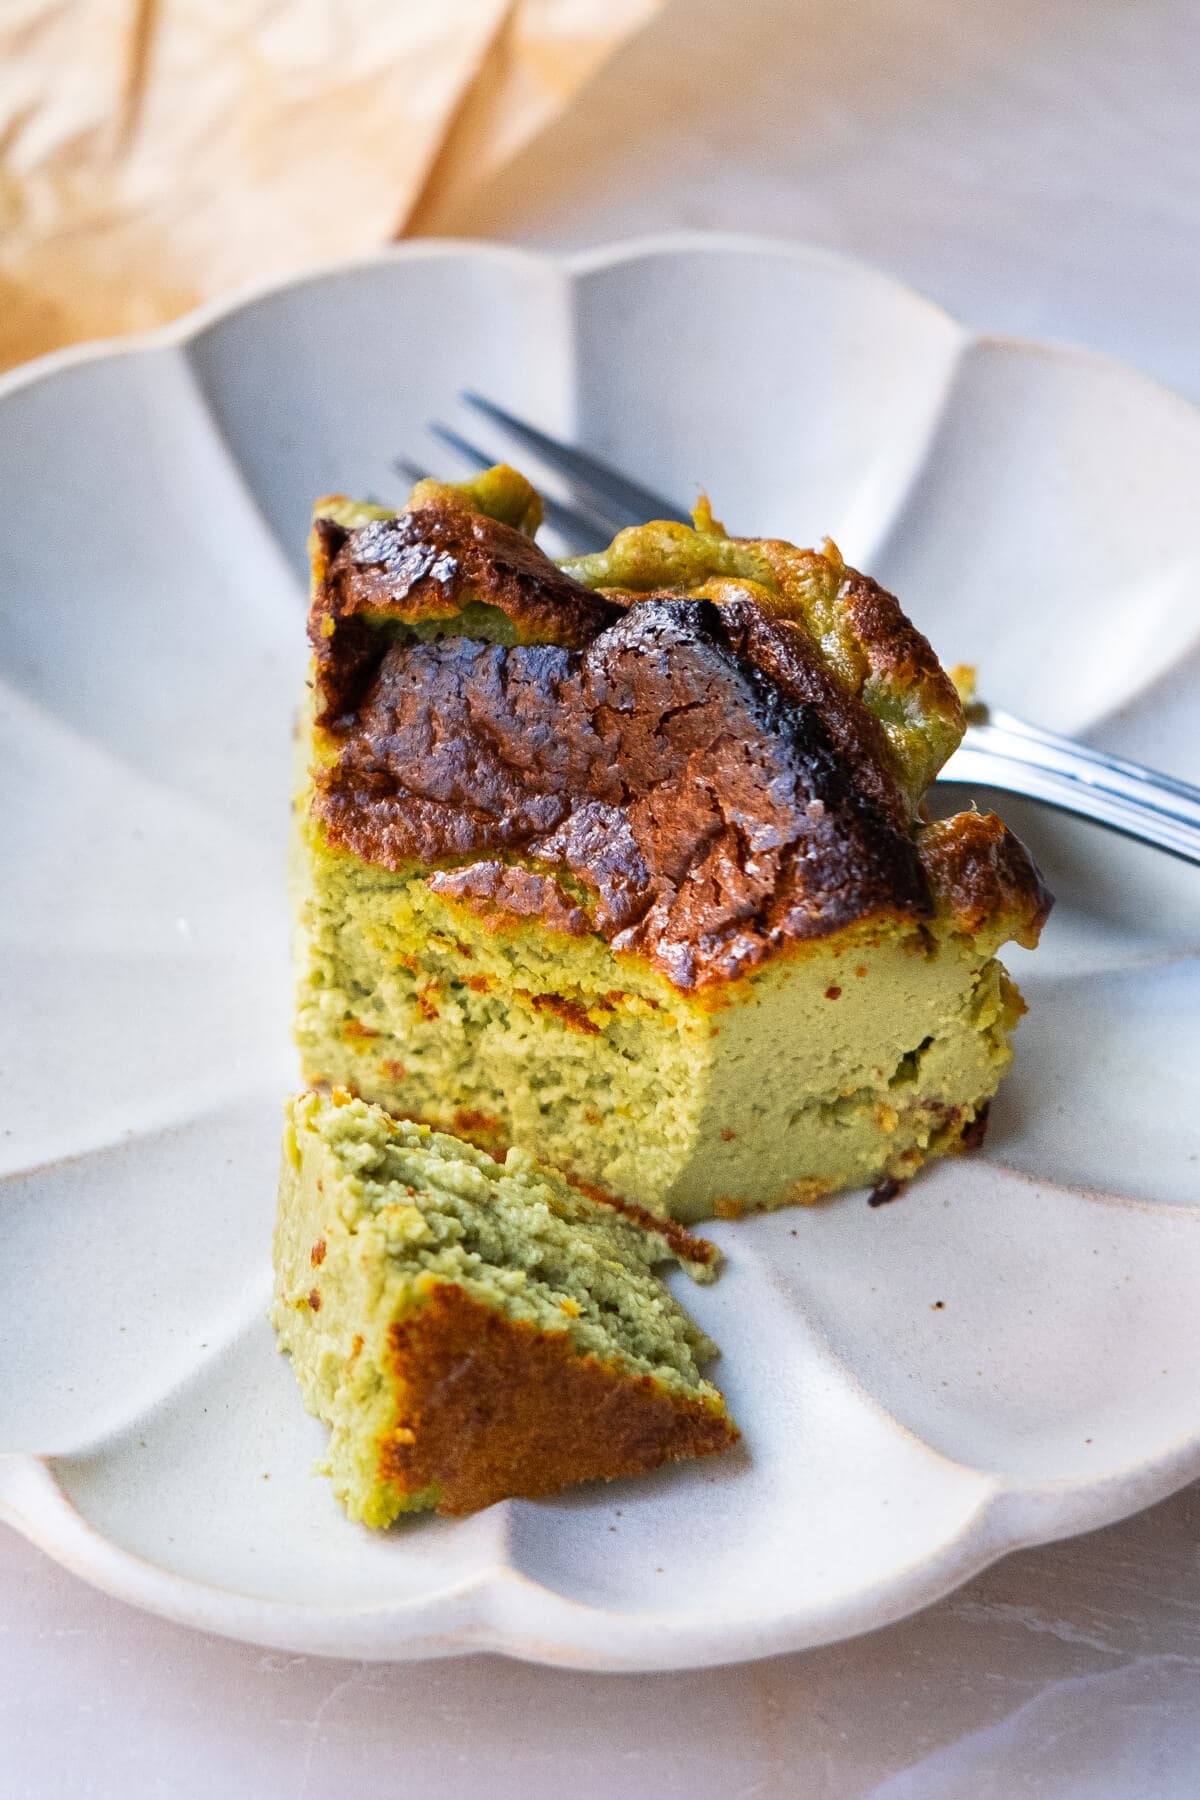 Vanilla Matcha Basque Cheesecake (Double Layered) – Takes Two Eggs